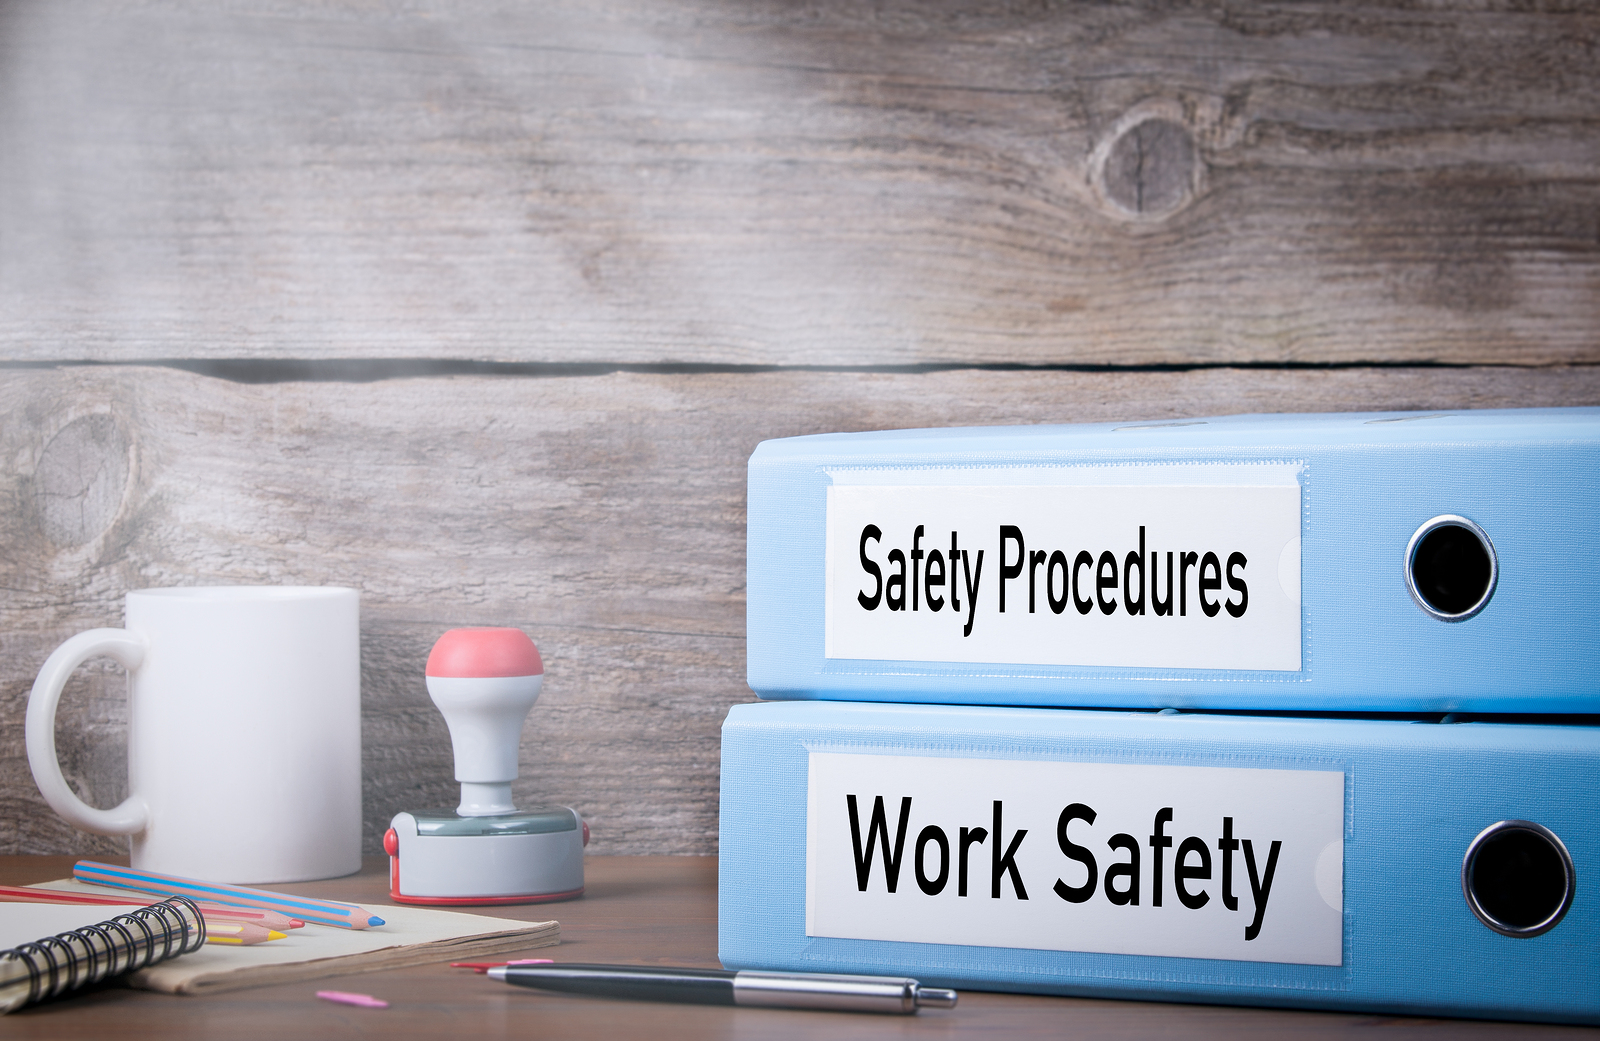 Workplace safety procedures